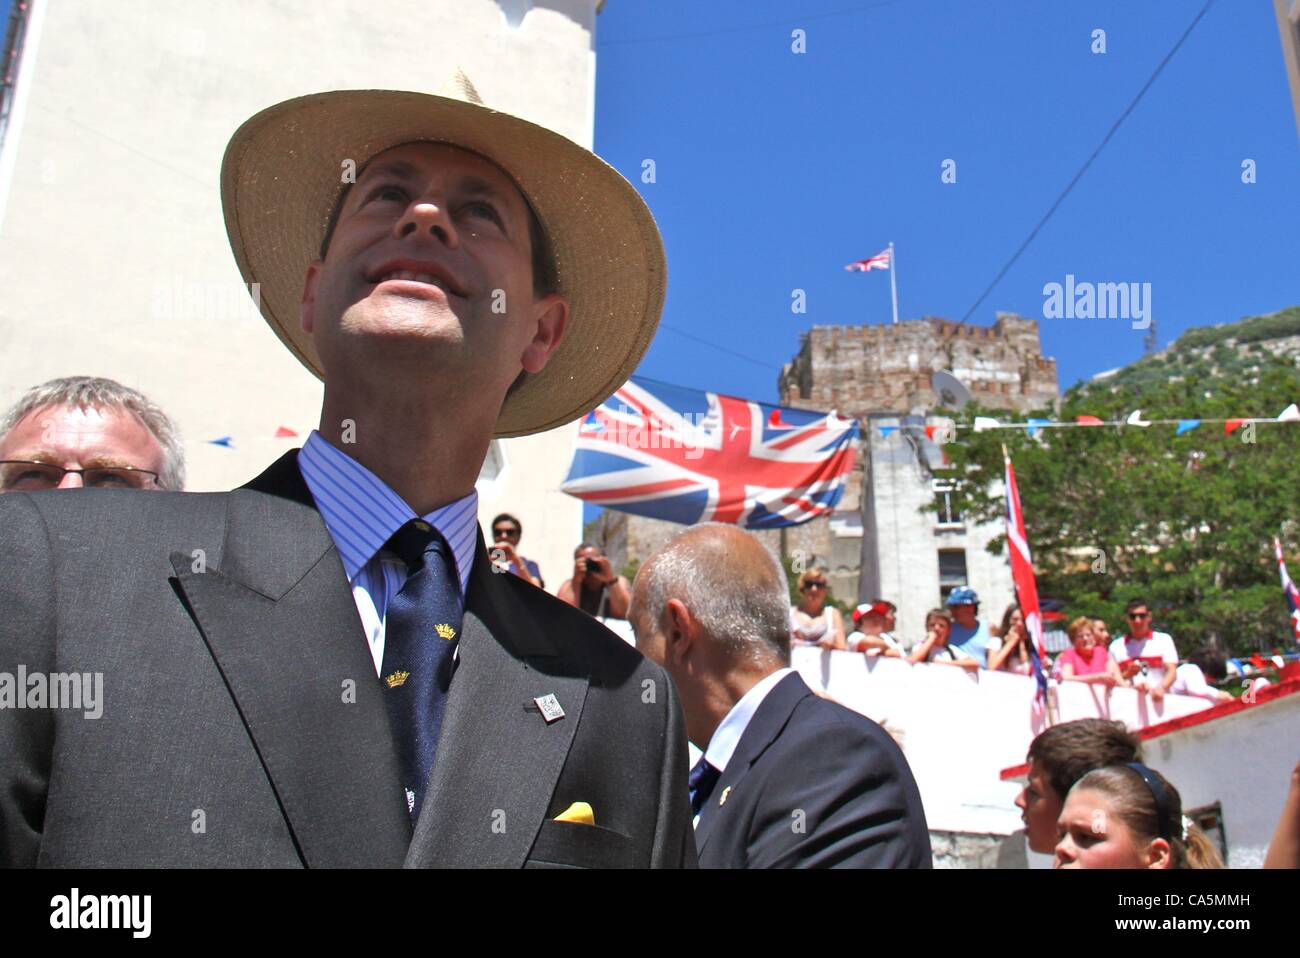 12/06/2012, Gibraltar. The Earl and countess of Wessex Edward and Sophie visit Gibraltar as part of the Diamond Jubilee Royal Tour. They were greeted by hundreds of proud British Gibraltarians with flags. Stock Photo